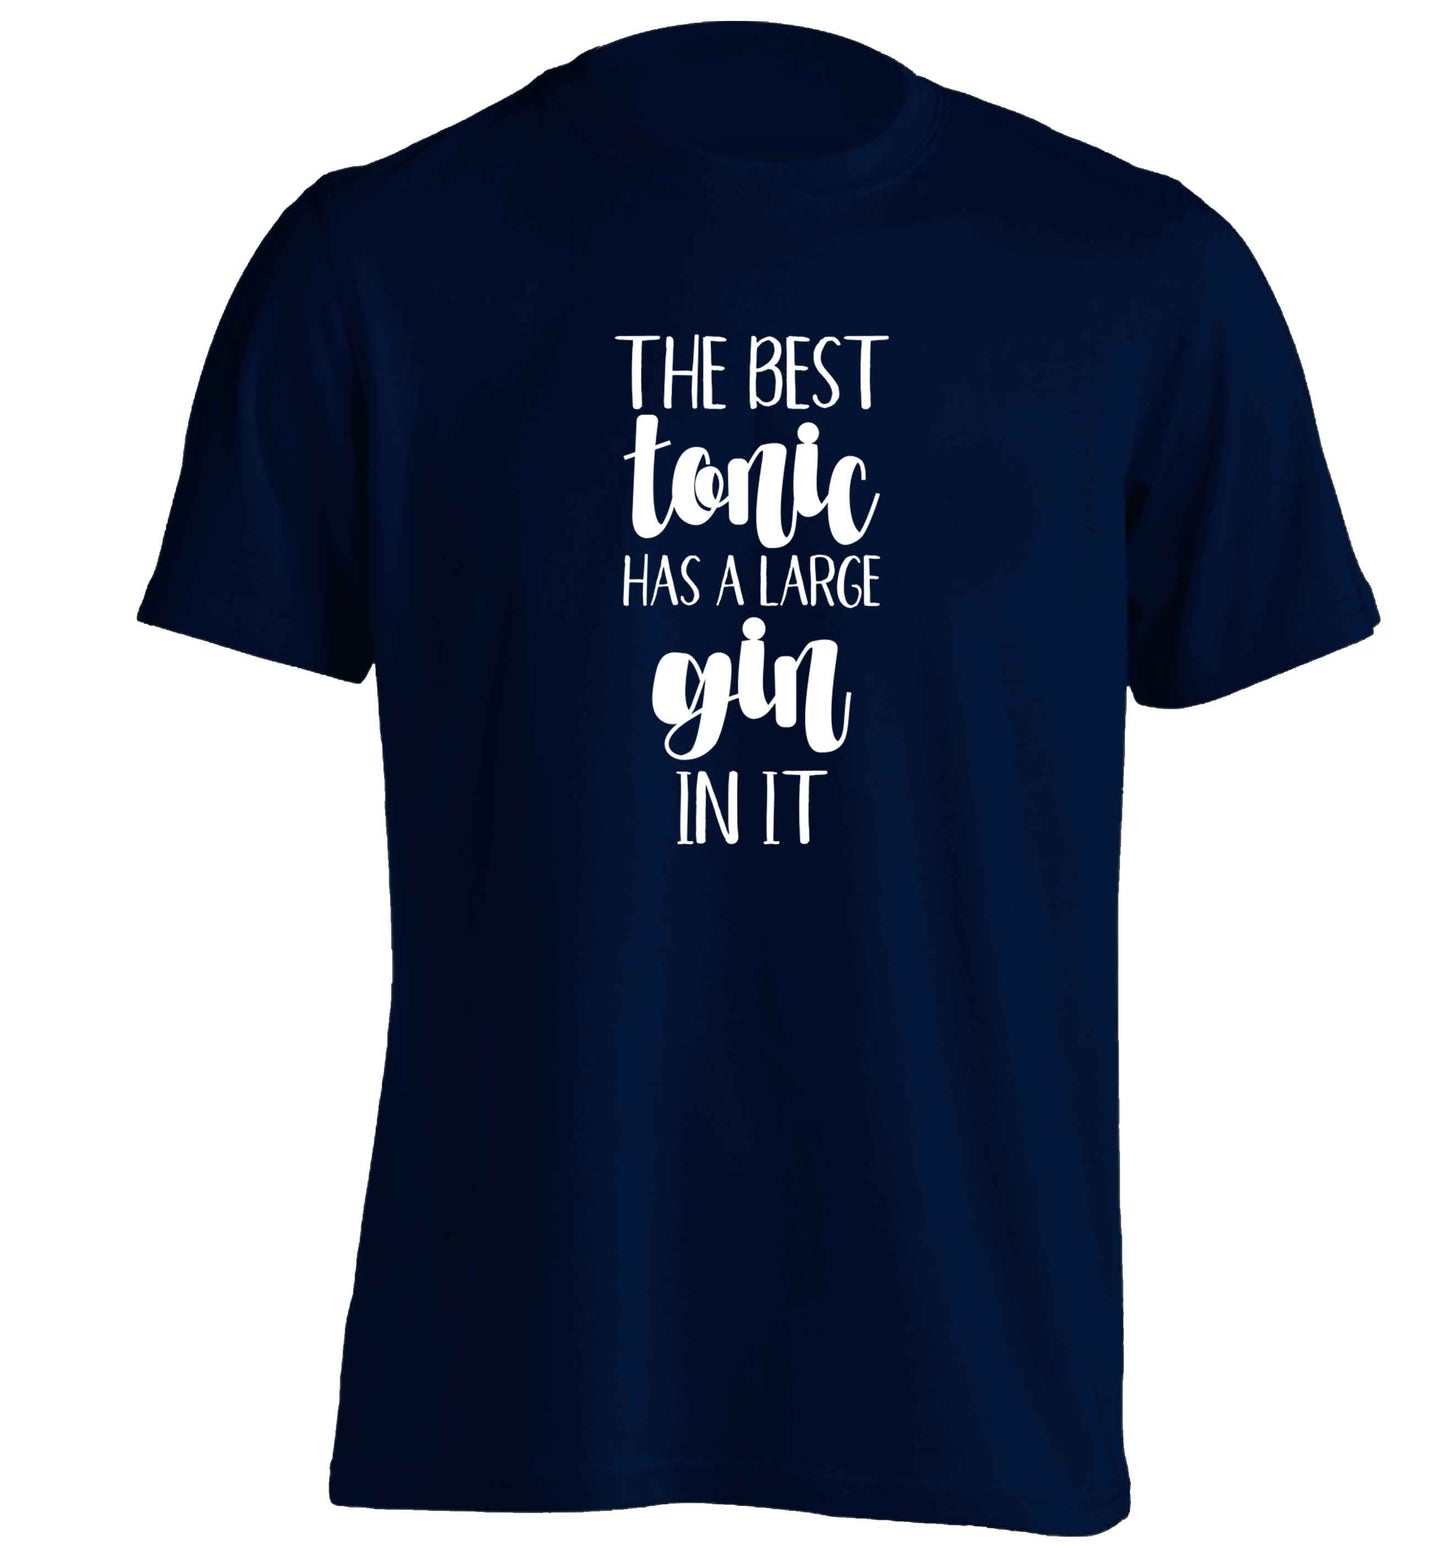 The best tonic has a large gin in it adults unisex navy Tshirt 2XL